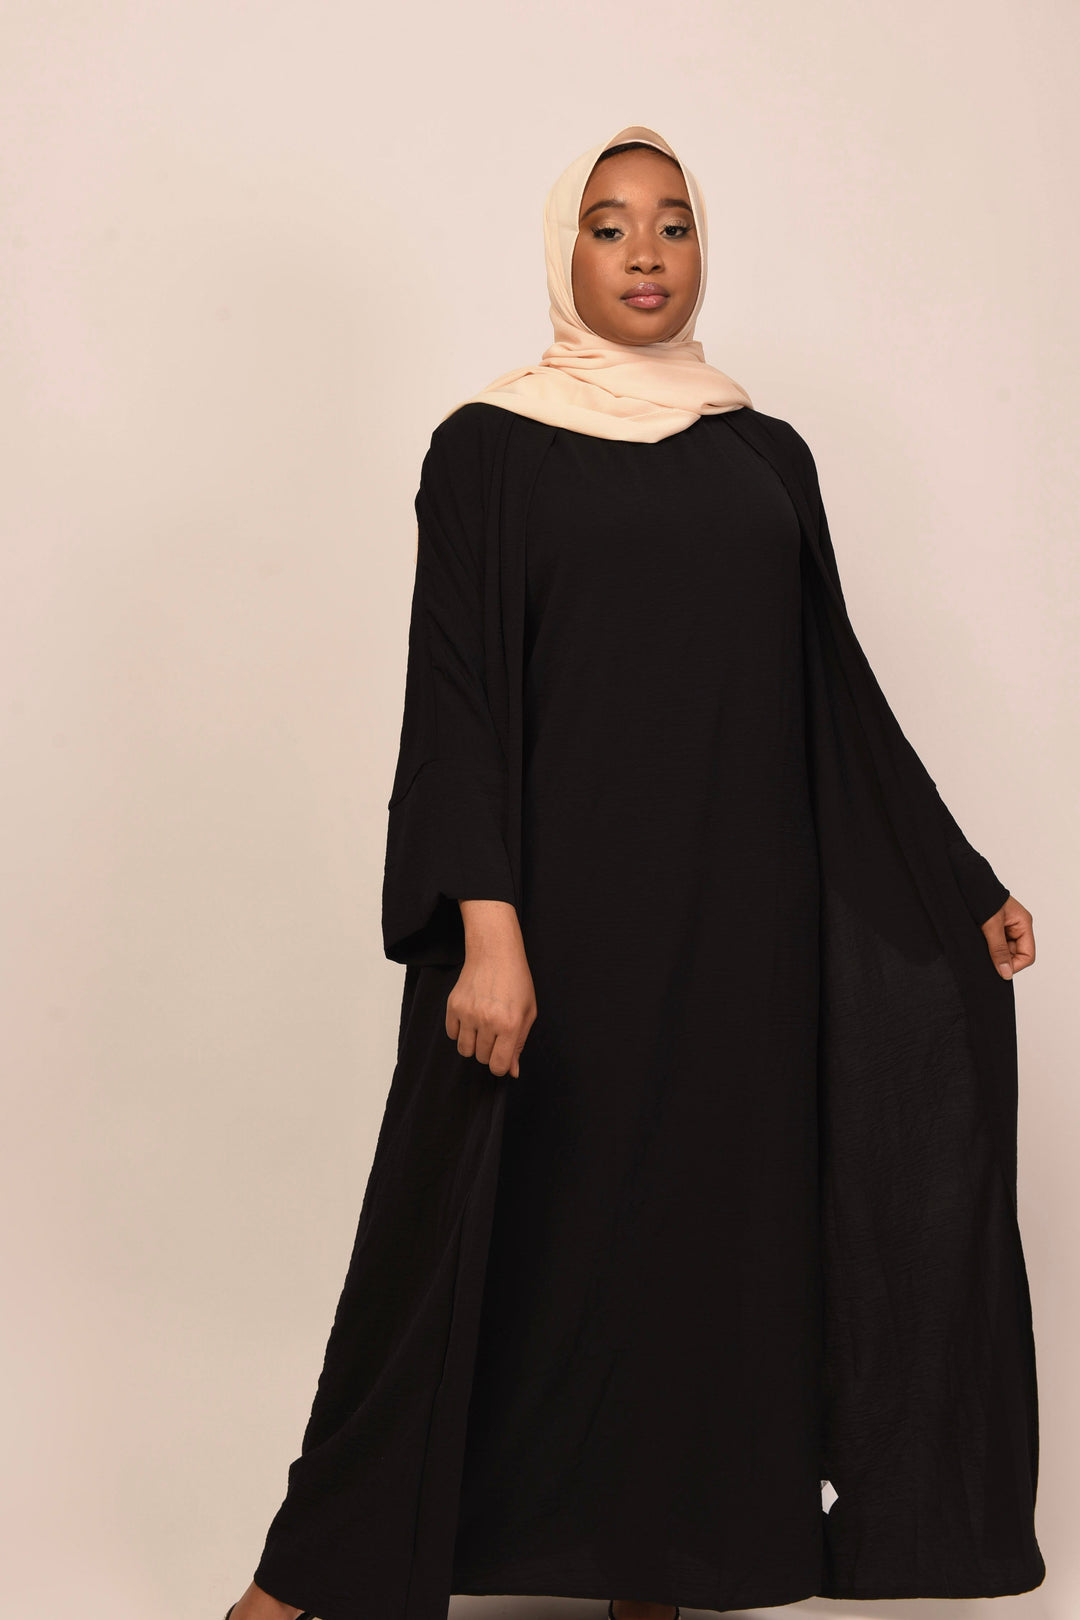 Get trendy with Lea 2-Piece Abaya Set - Black (As Is) -  available at Voilee NY. Grab yours for $54.90 today!